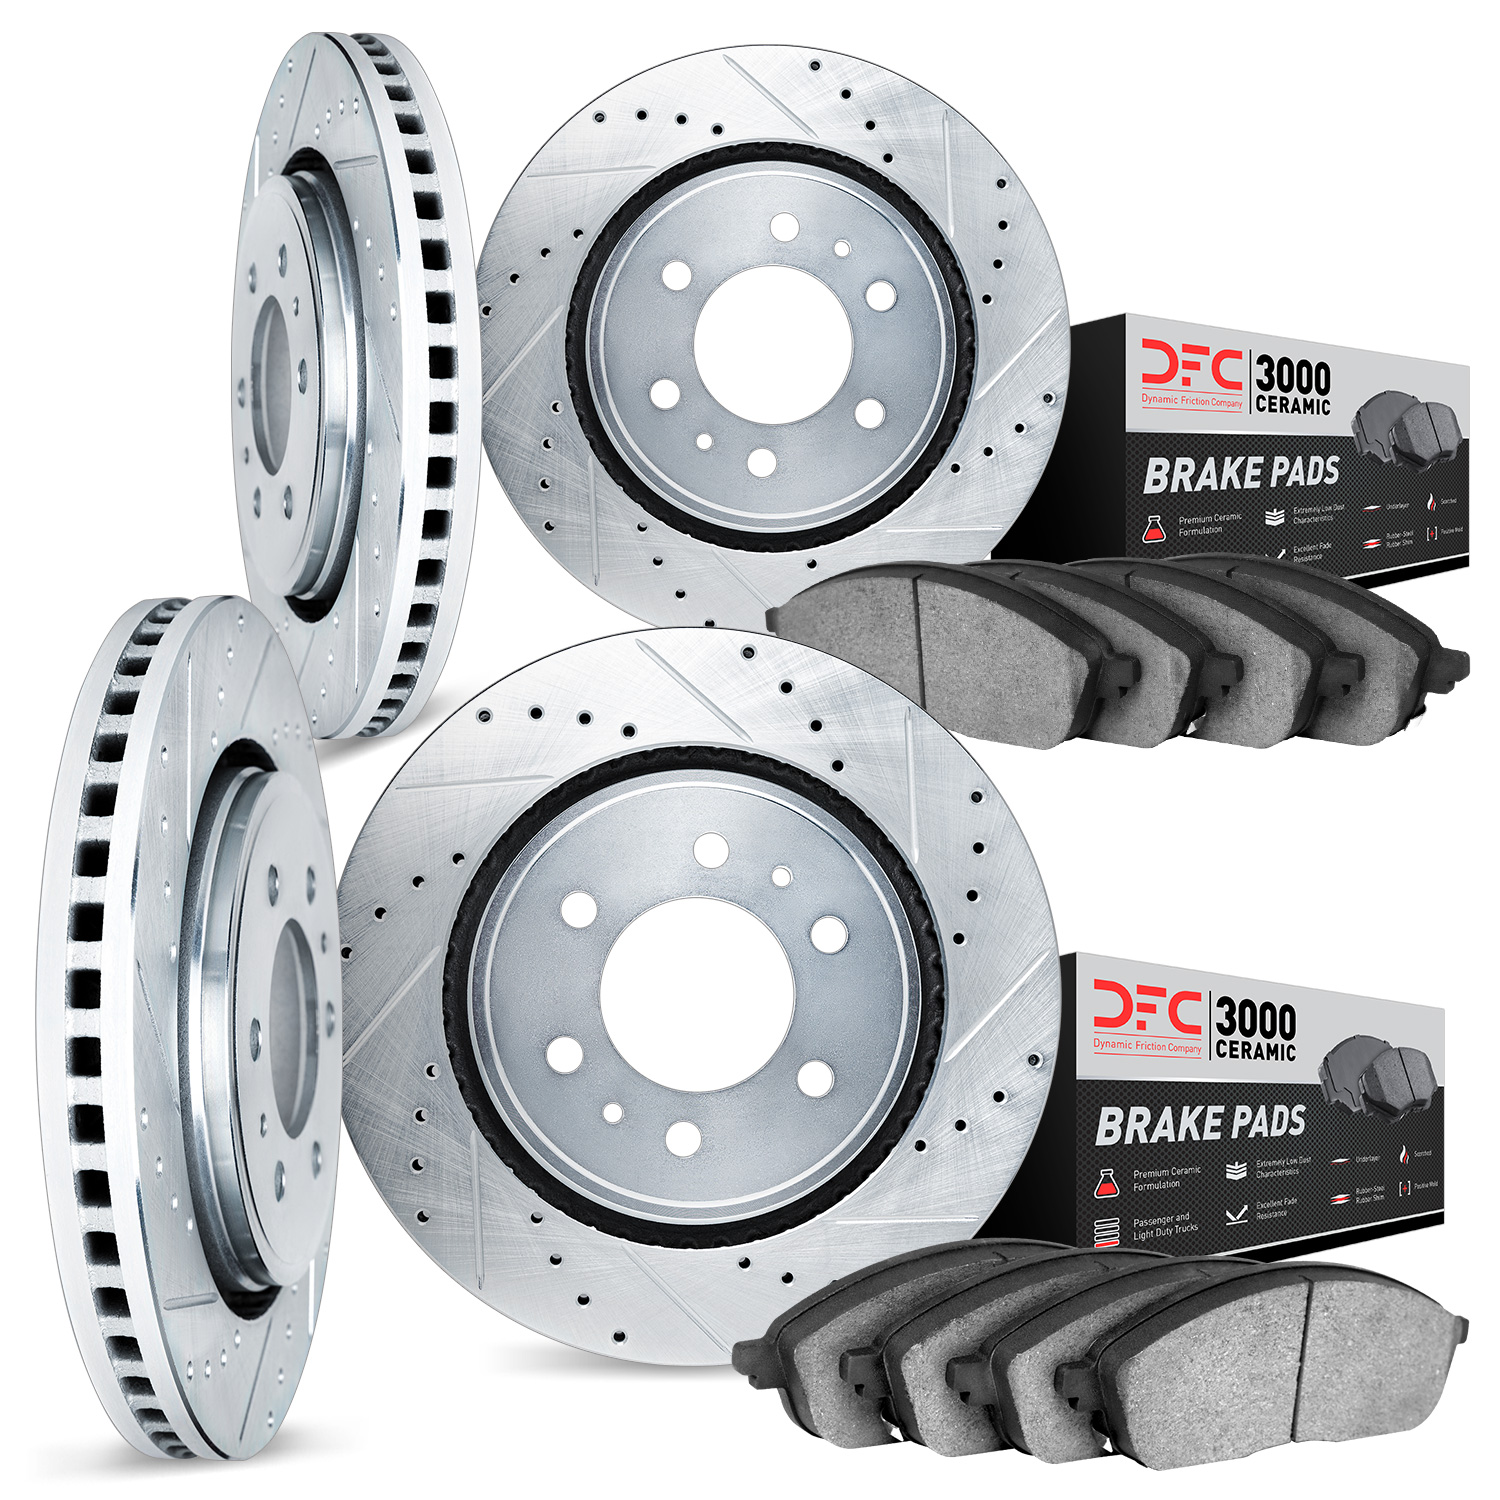 7304-54087 Drilled/Slotted Brake Rotor with 3000-Series Ceramic Brake Pads Kit [Silver], 2007-2009 Ford/Lincoln/Mercury/Mazda, P